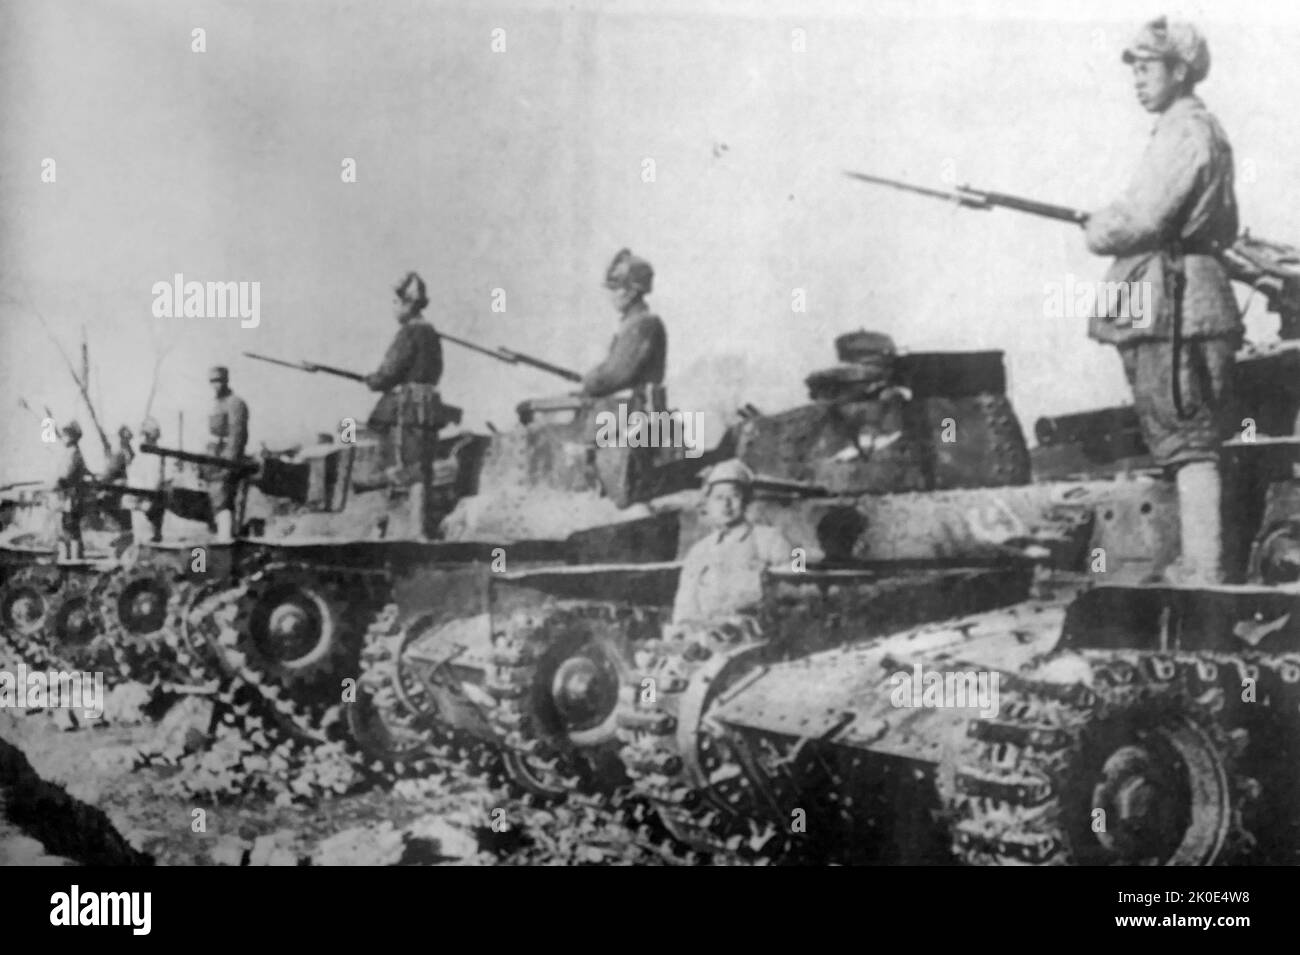 Tanks of the Chinese People's Liberation Army, December 1949. Stock Photo